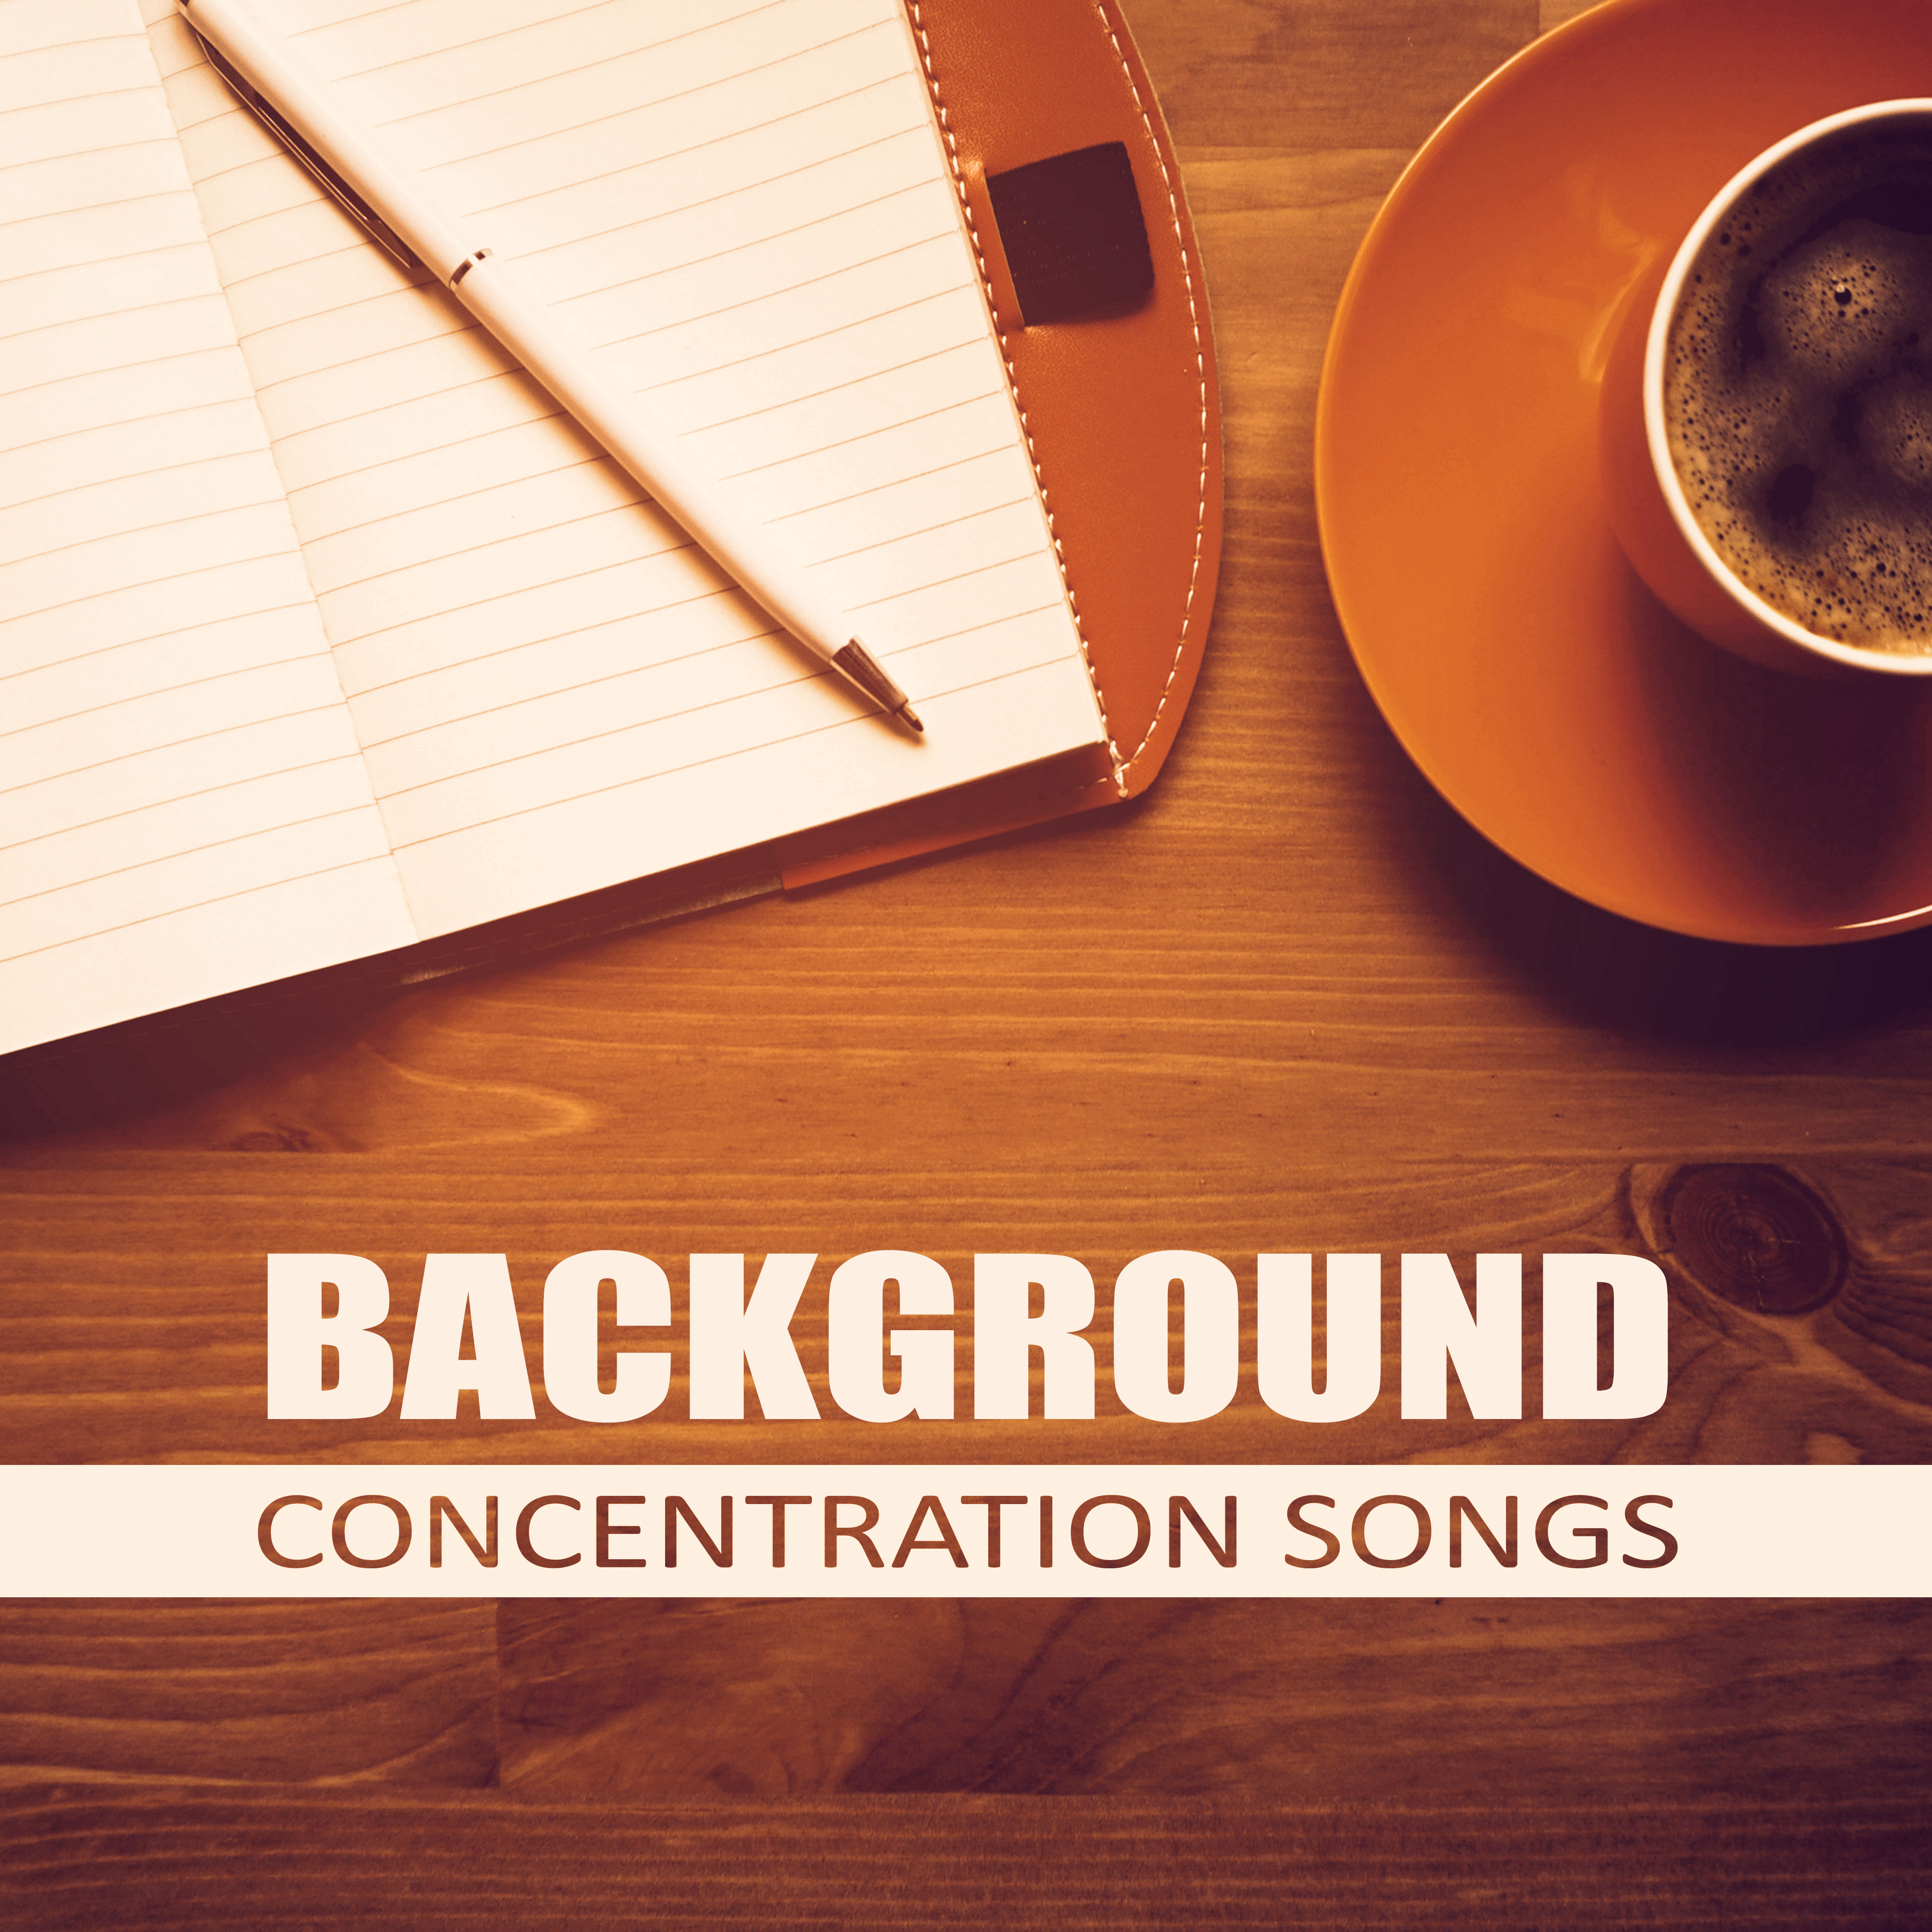 Background Concentration Songs – Learning Sounds to Focus on Task, Concentration Music for Studying, Relaxing Piano Music for Reading